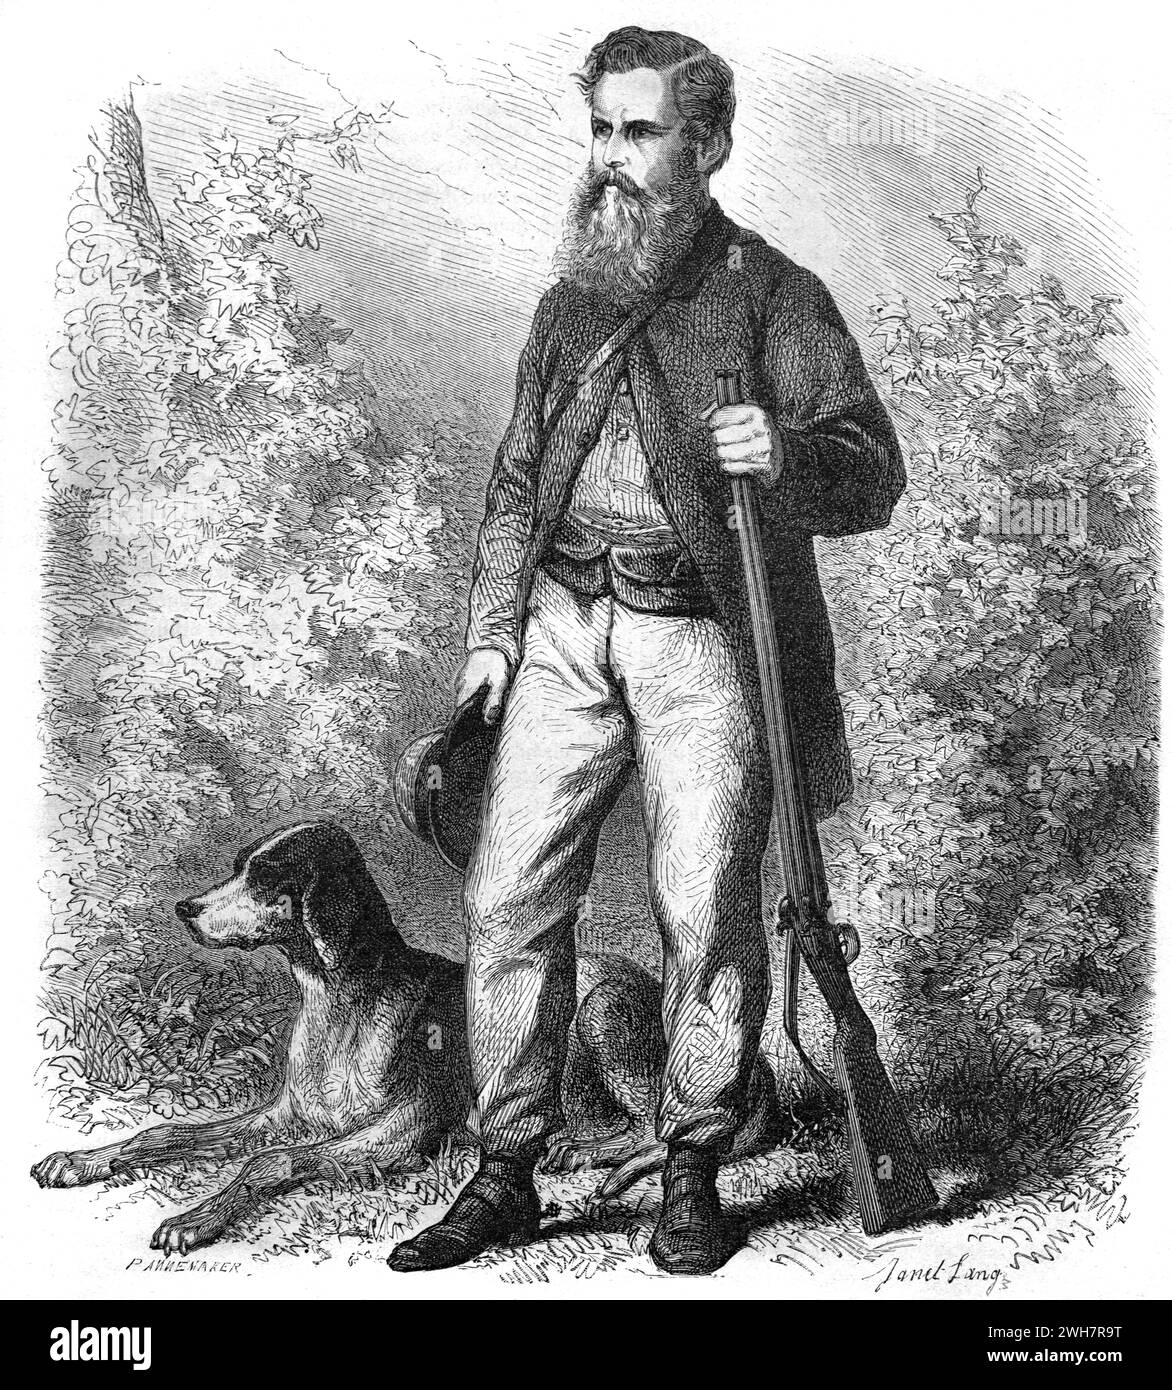 Full-length Portrait of William Charles Baldwin (1826-1903) a British or English Big-Game Hunter, Posing with a Rifle and His Hunting Dog. Vintage or Historic Engraving or Illustration 1863 Stock Photo